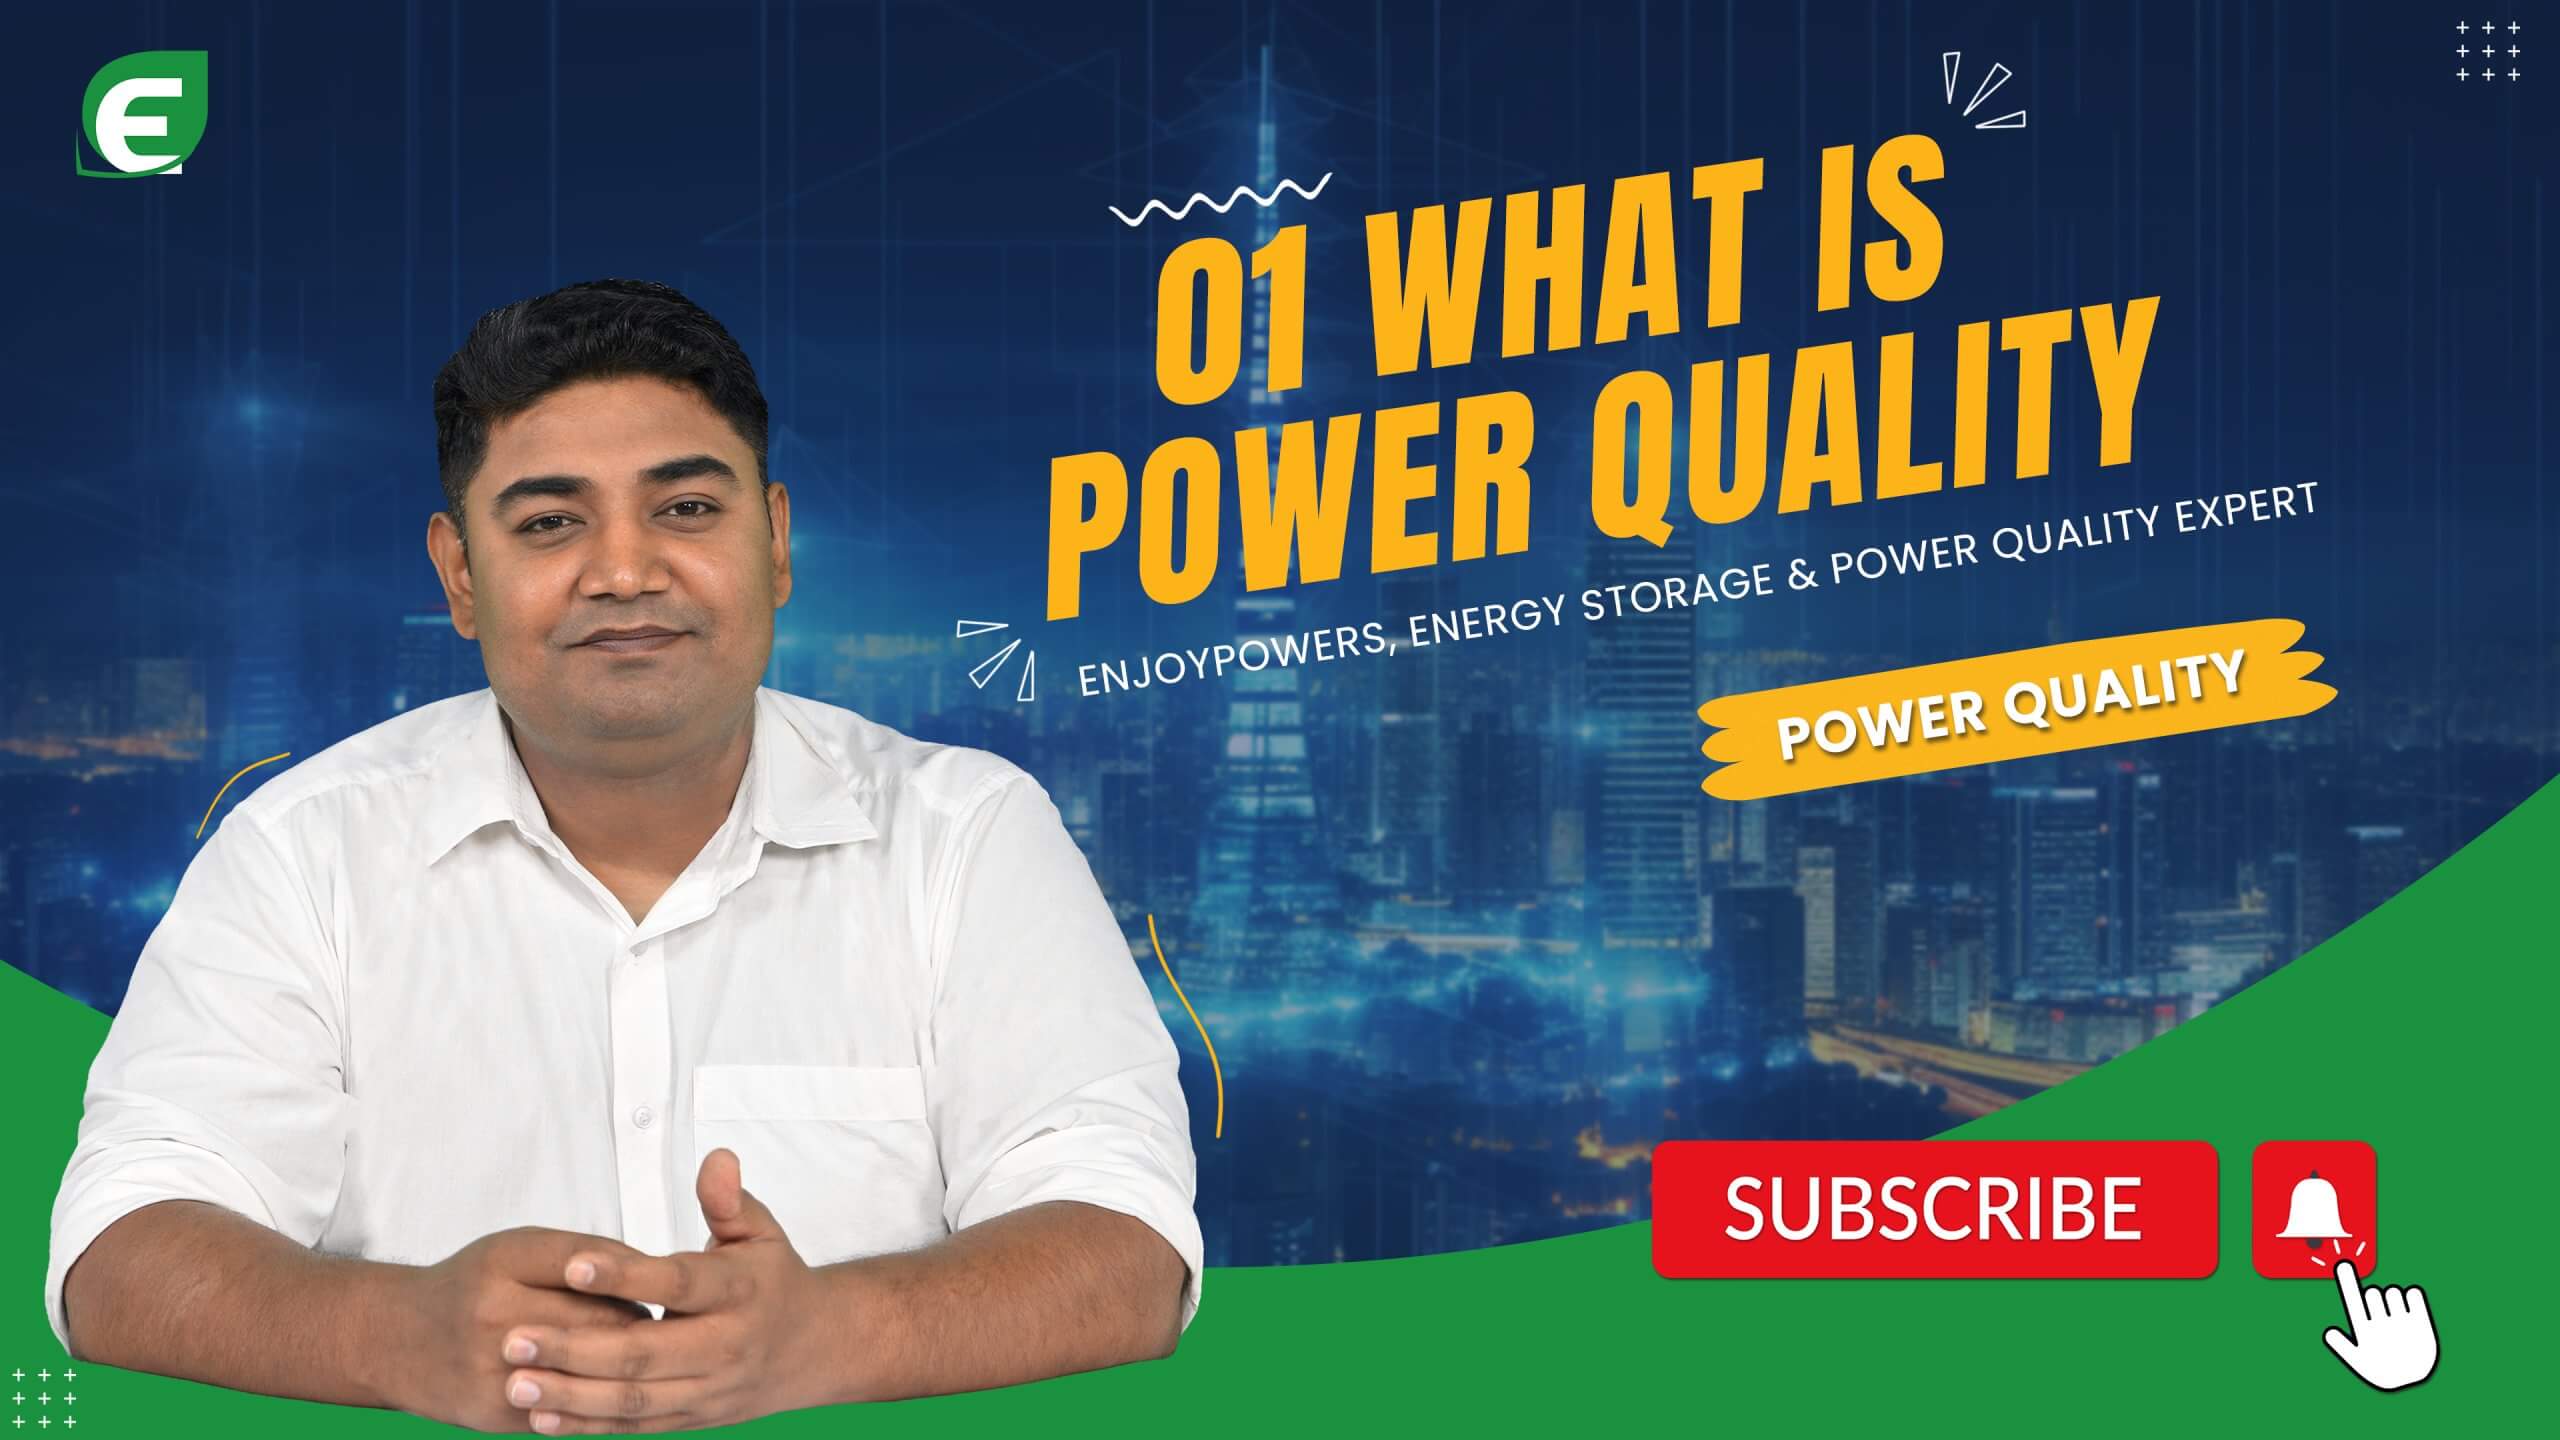 Enjoypowers' Power Quality Course